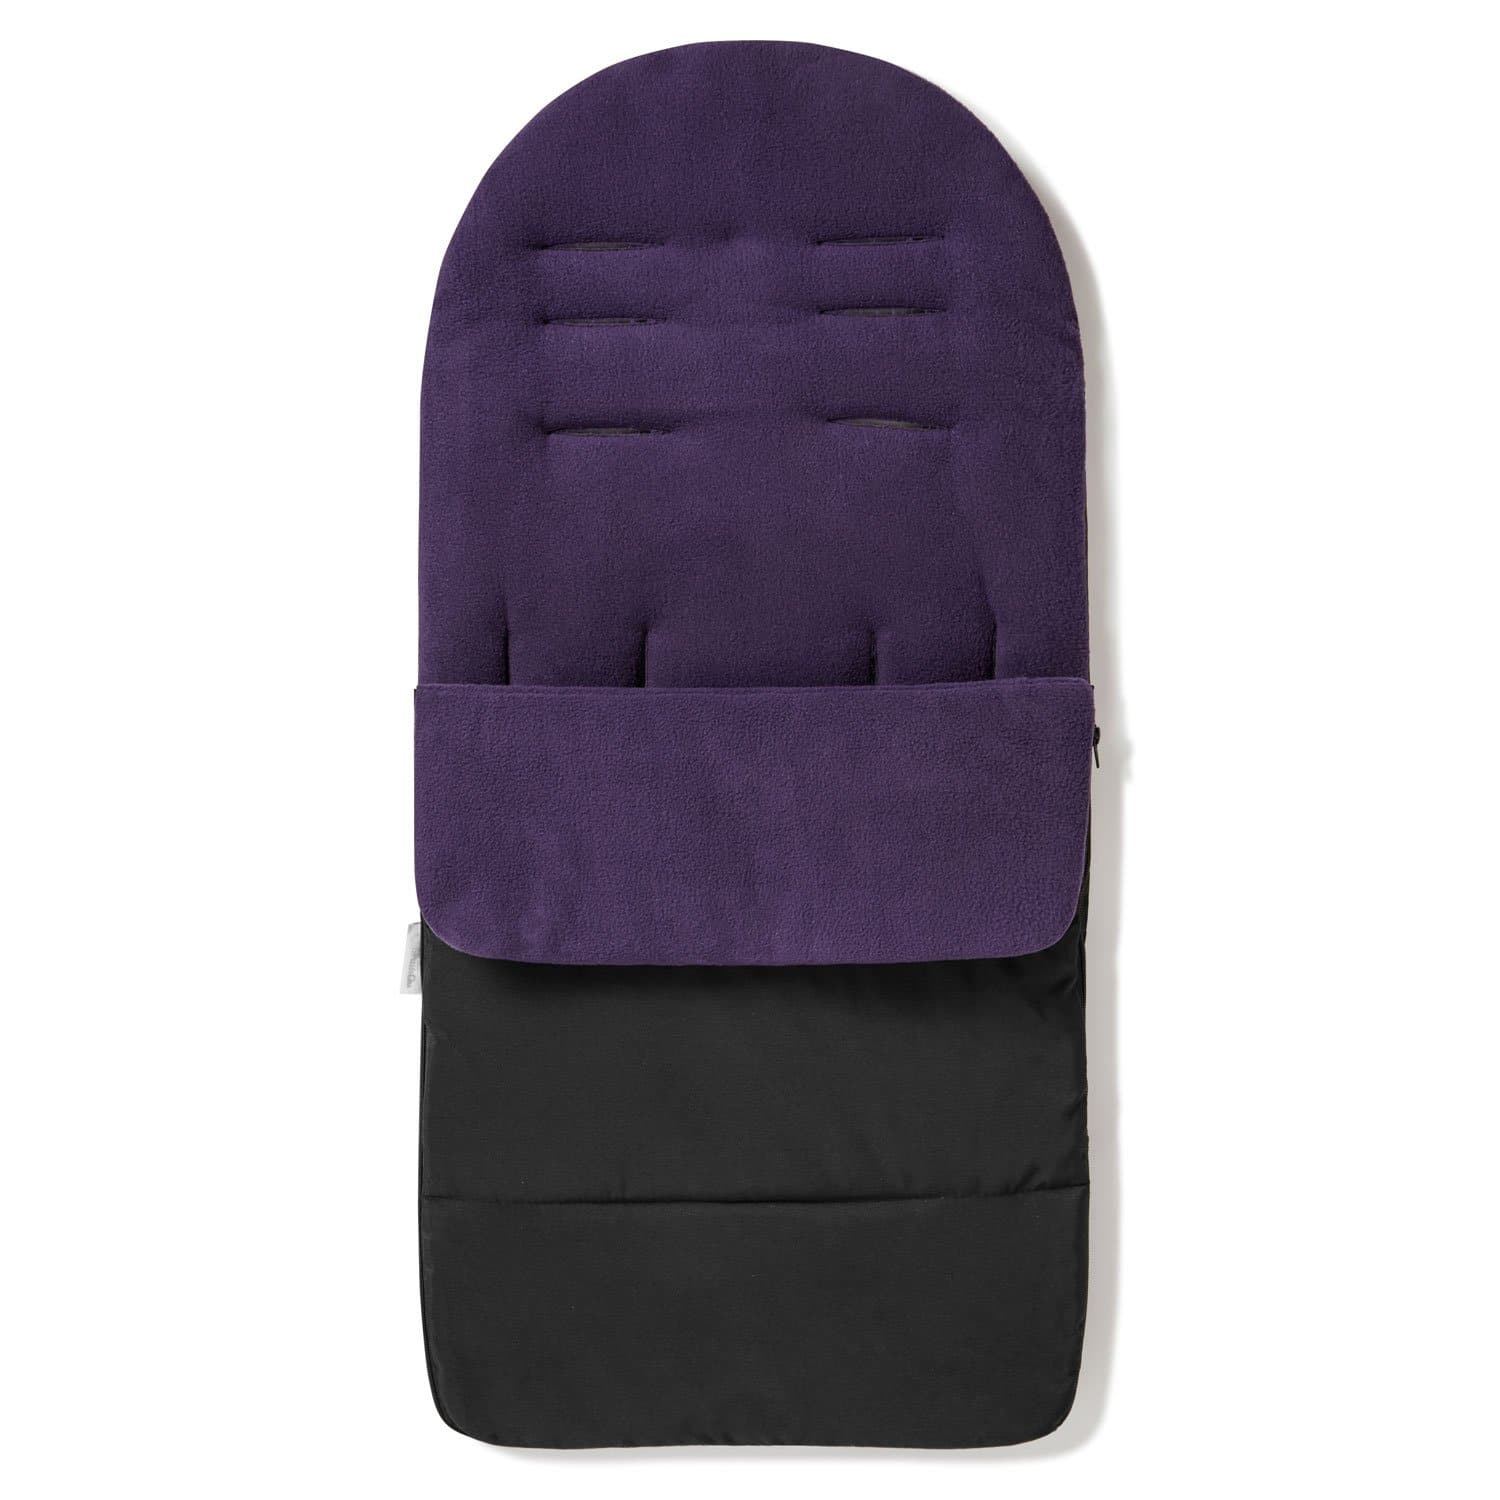 Premium Footmuff / Cosy Toes Compatible with Norton - Plum Purple / Fits All Models | For Your Little One